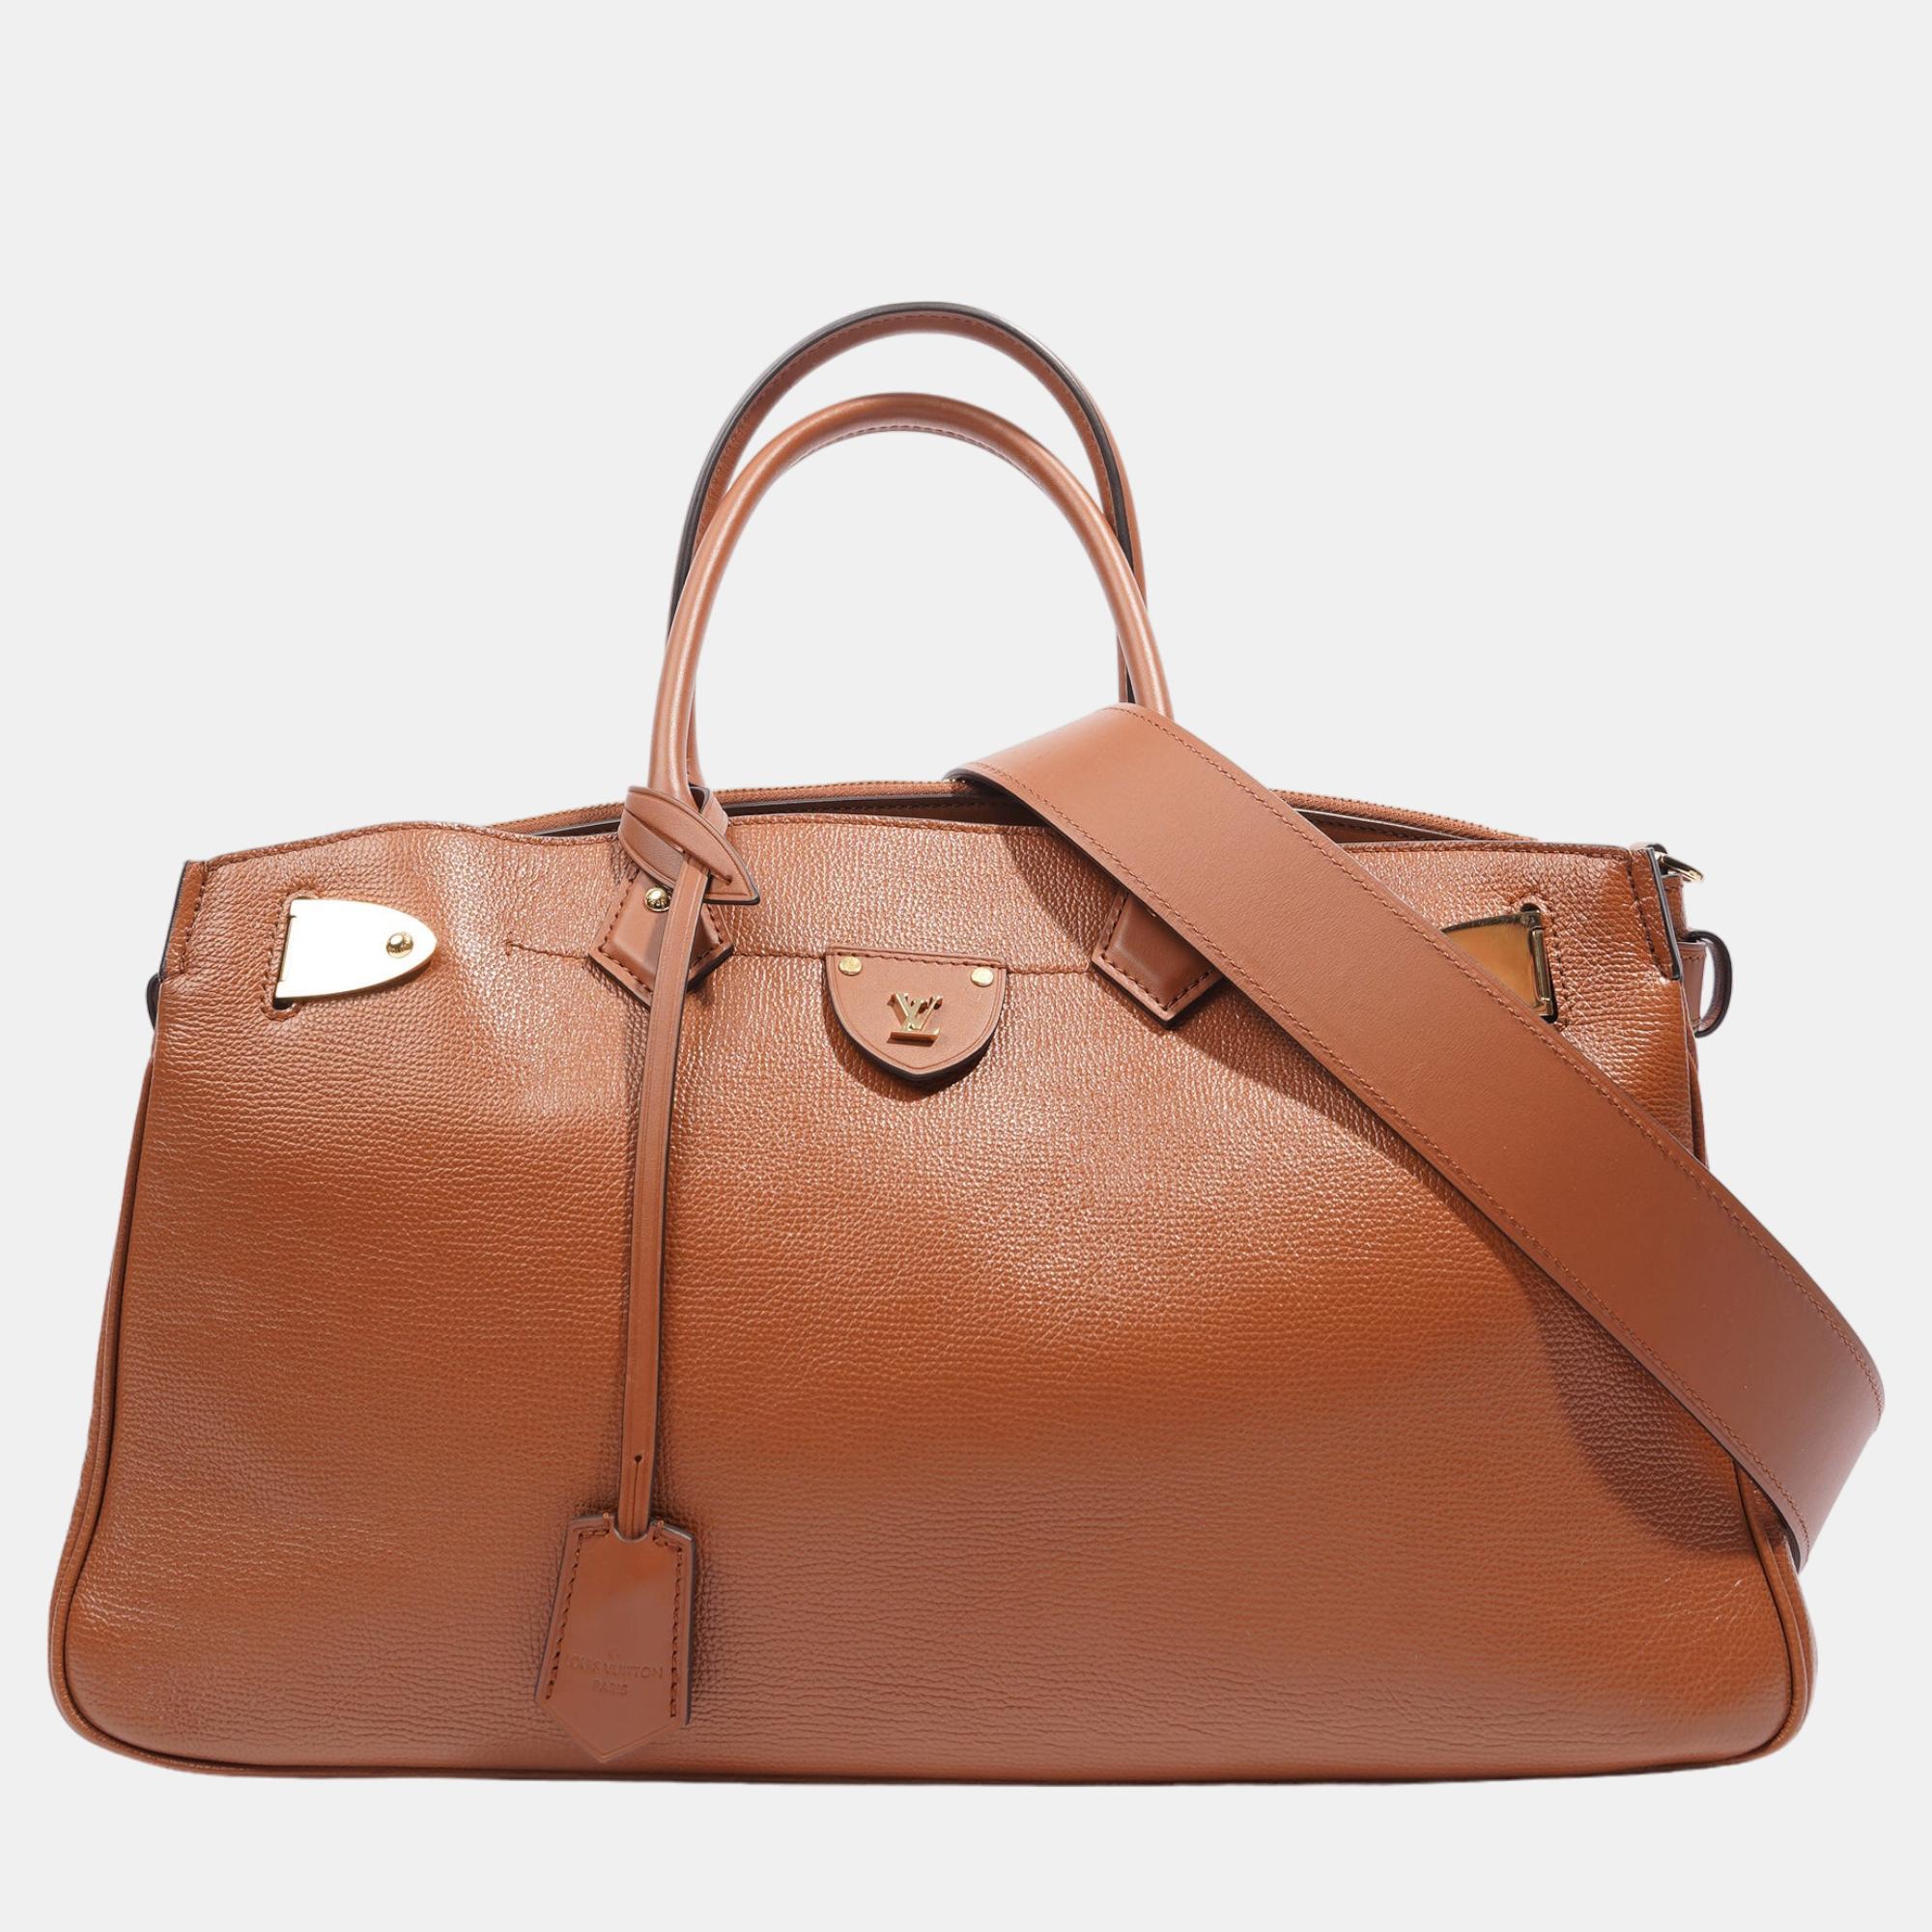 Louis vuitton all set bag brown leather